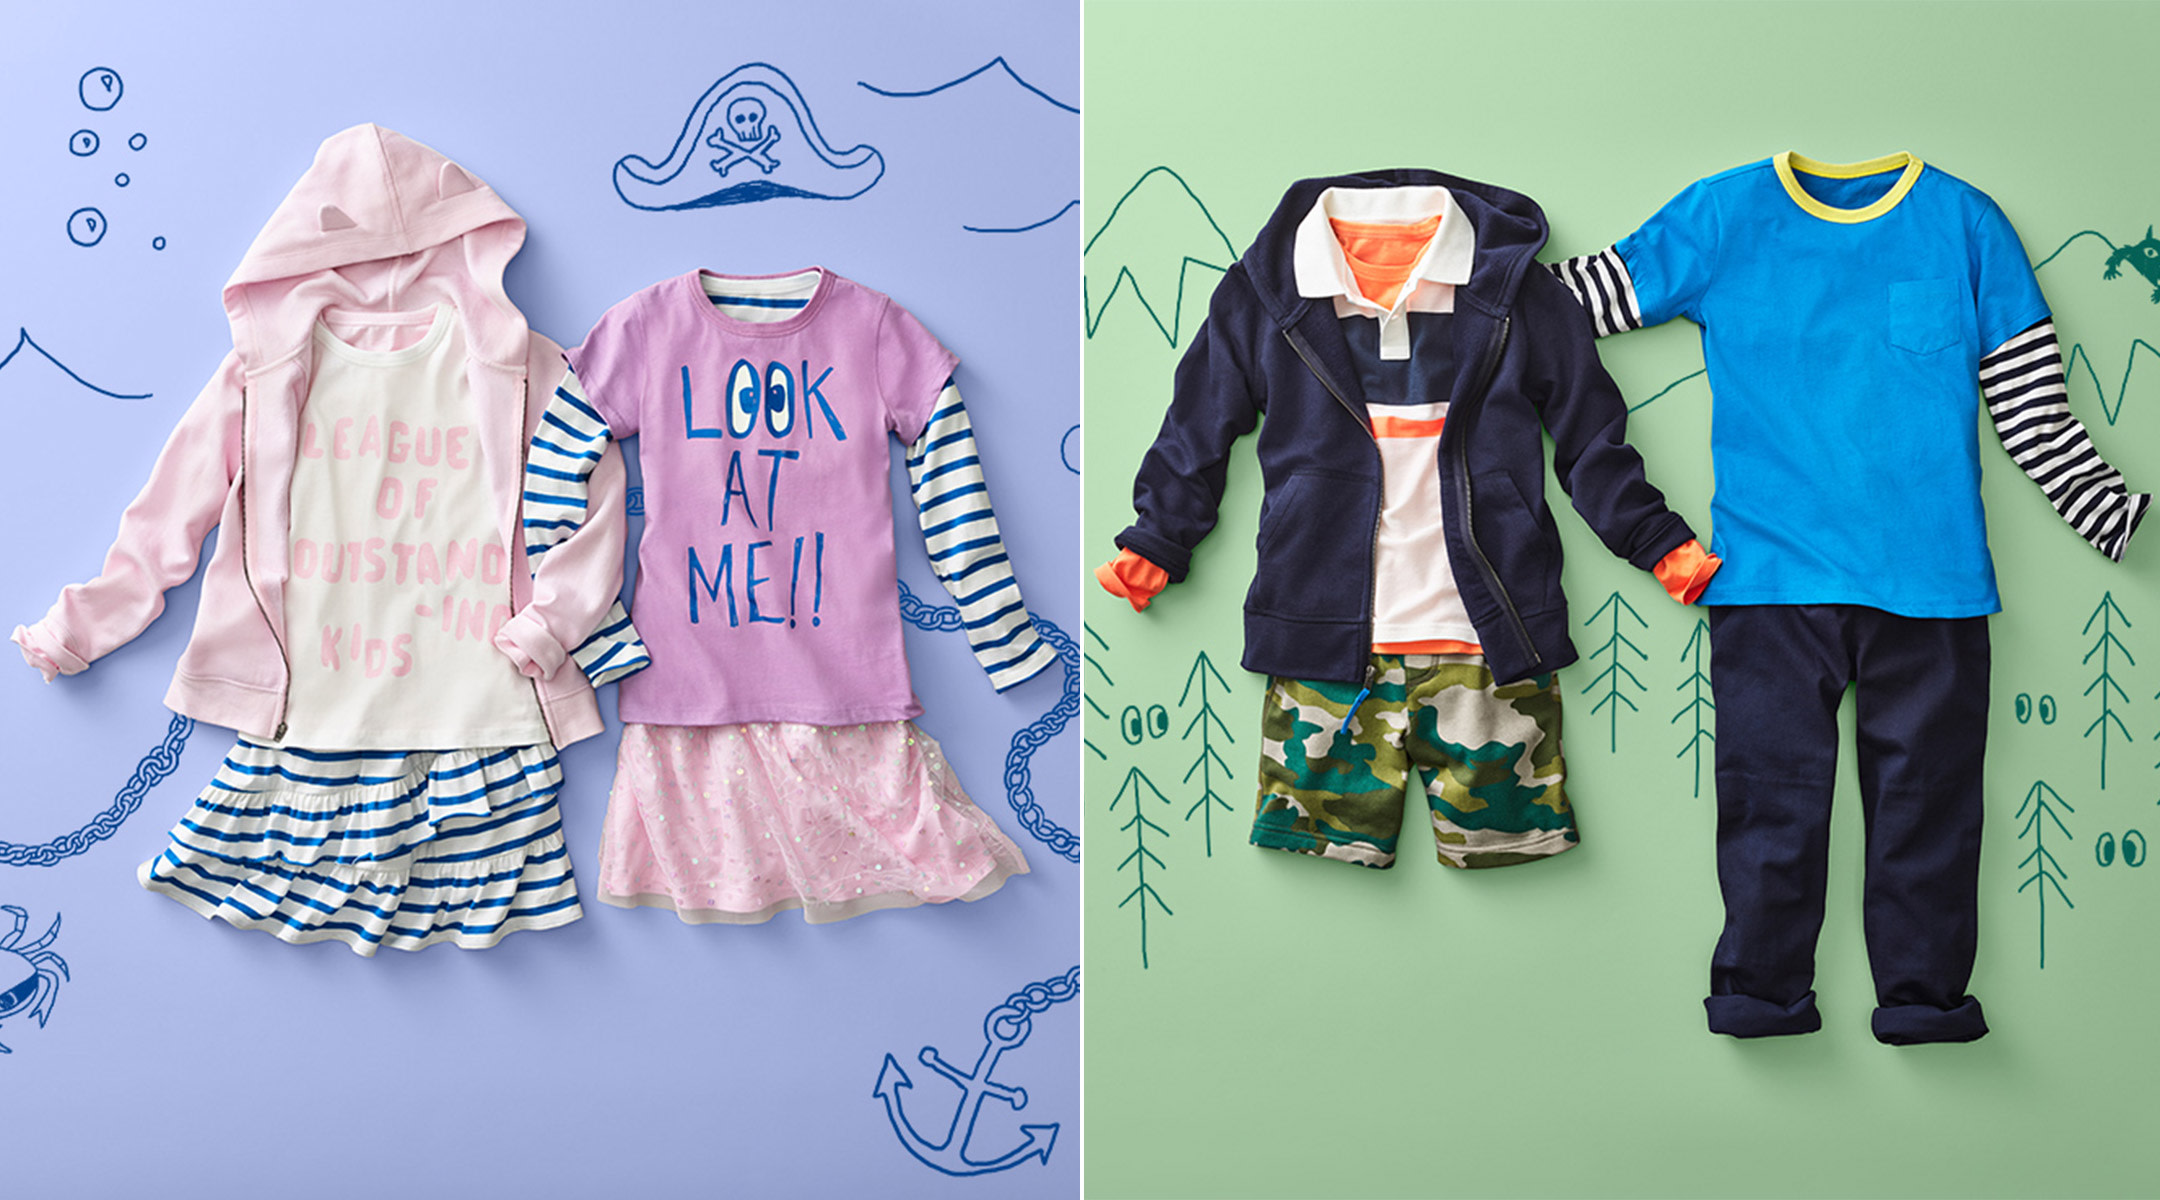 j. crew launches budget kids clothing line